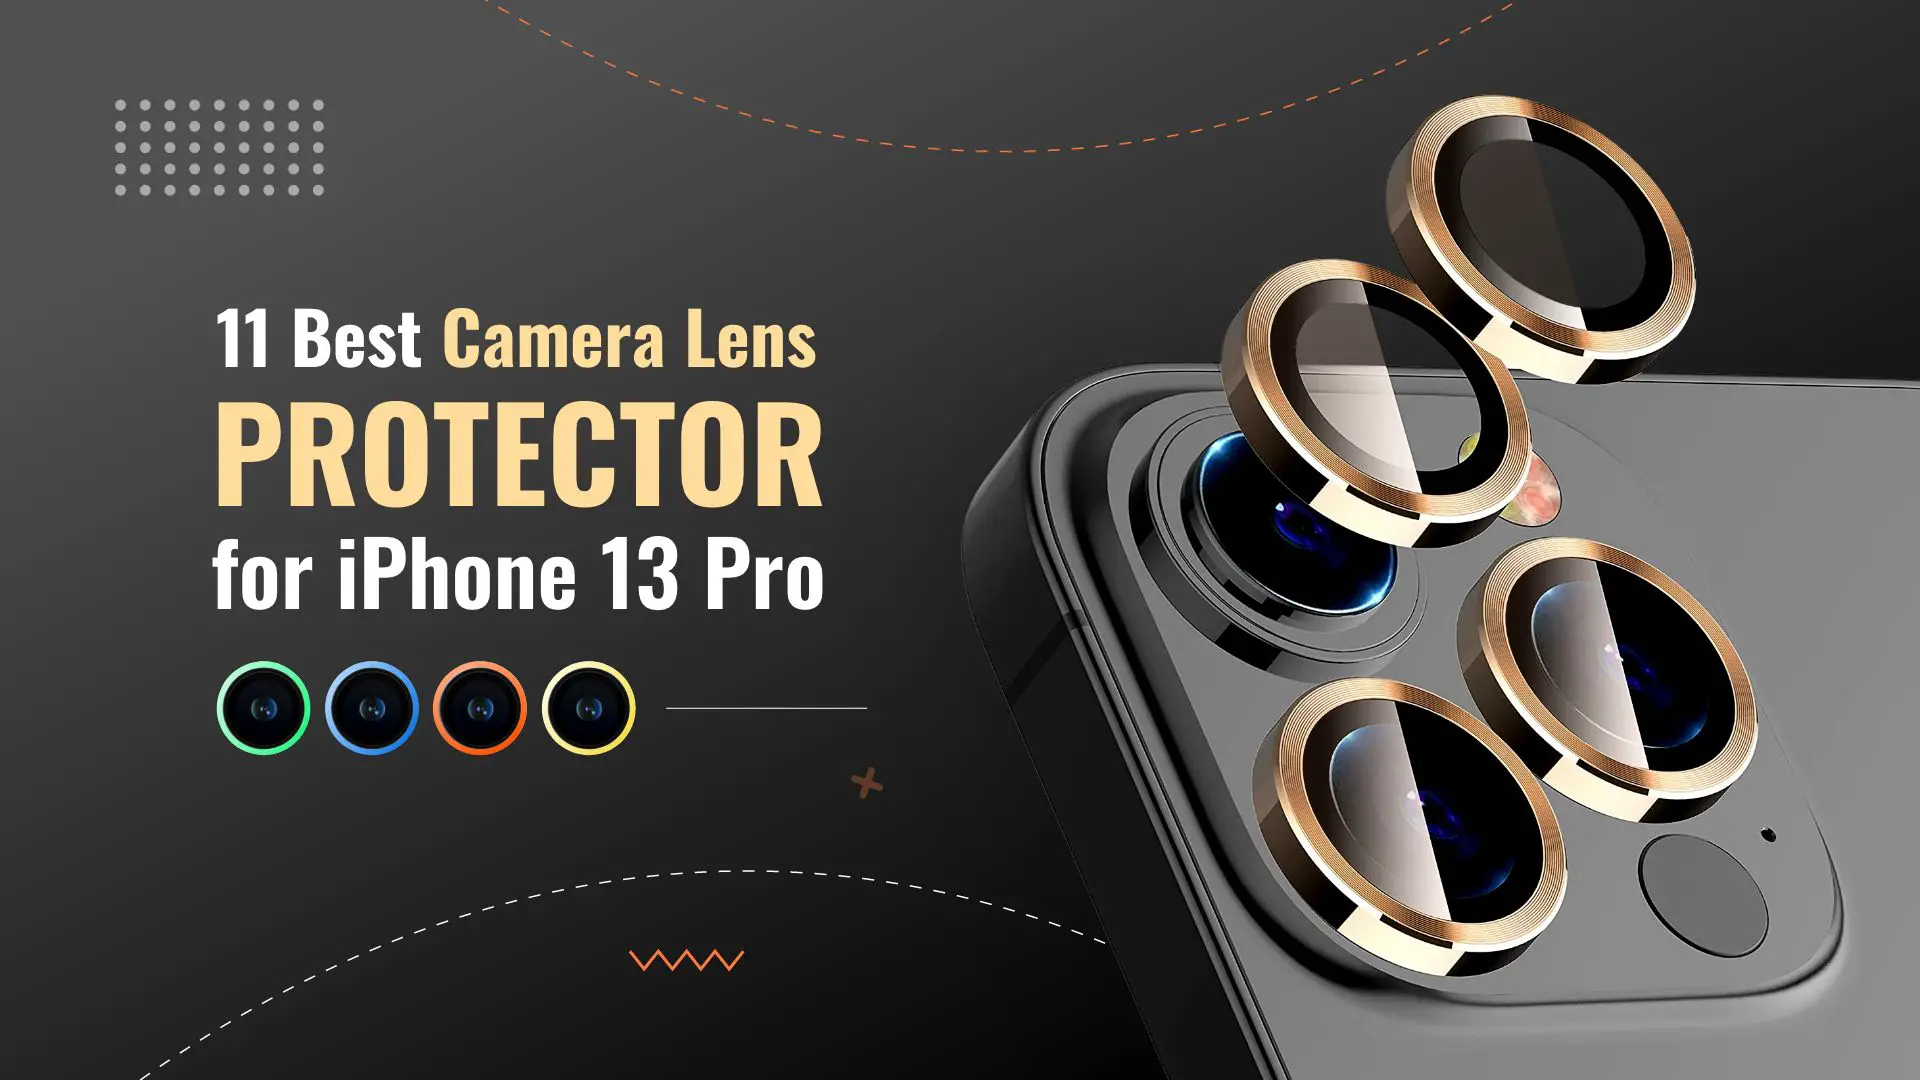 11 Best Camera Lens Protector for iPhone 13 Pro and Pro Max in 2023